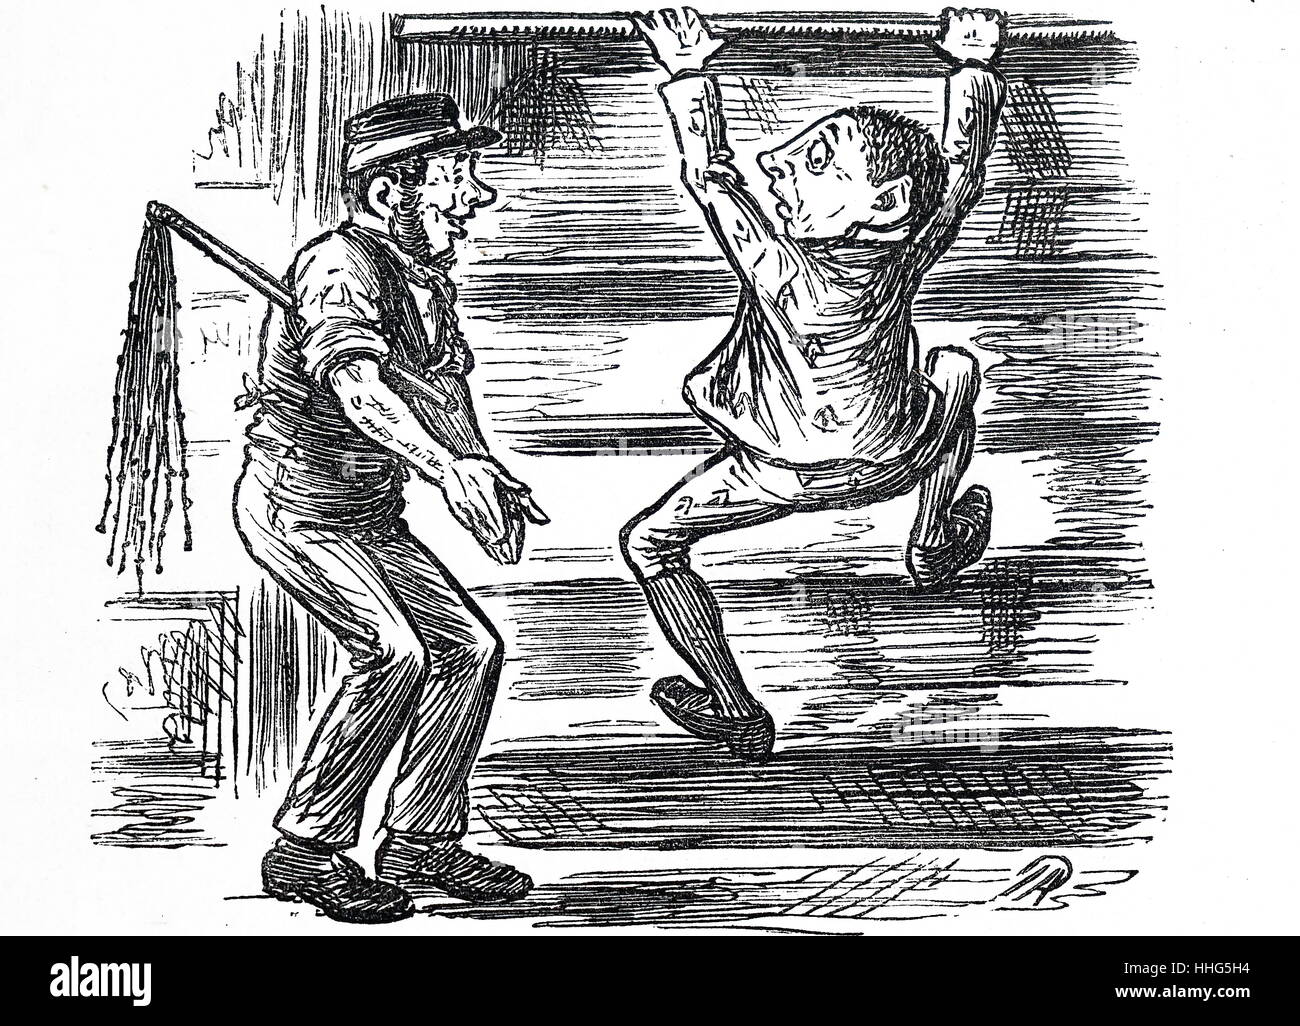 Cartoon prison officer is shown catching a convict climbing the prison wall. He is shown with a cat-o-nine-tails, a whip known for it's extreme pain. Dated 1882 Stock Photo